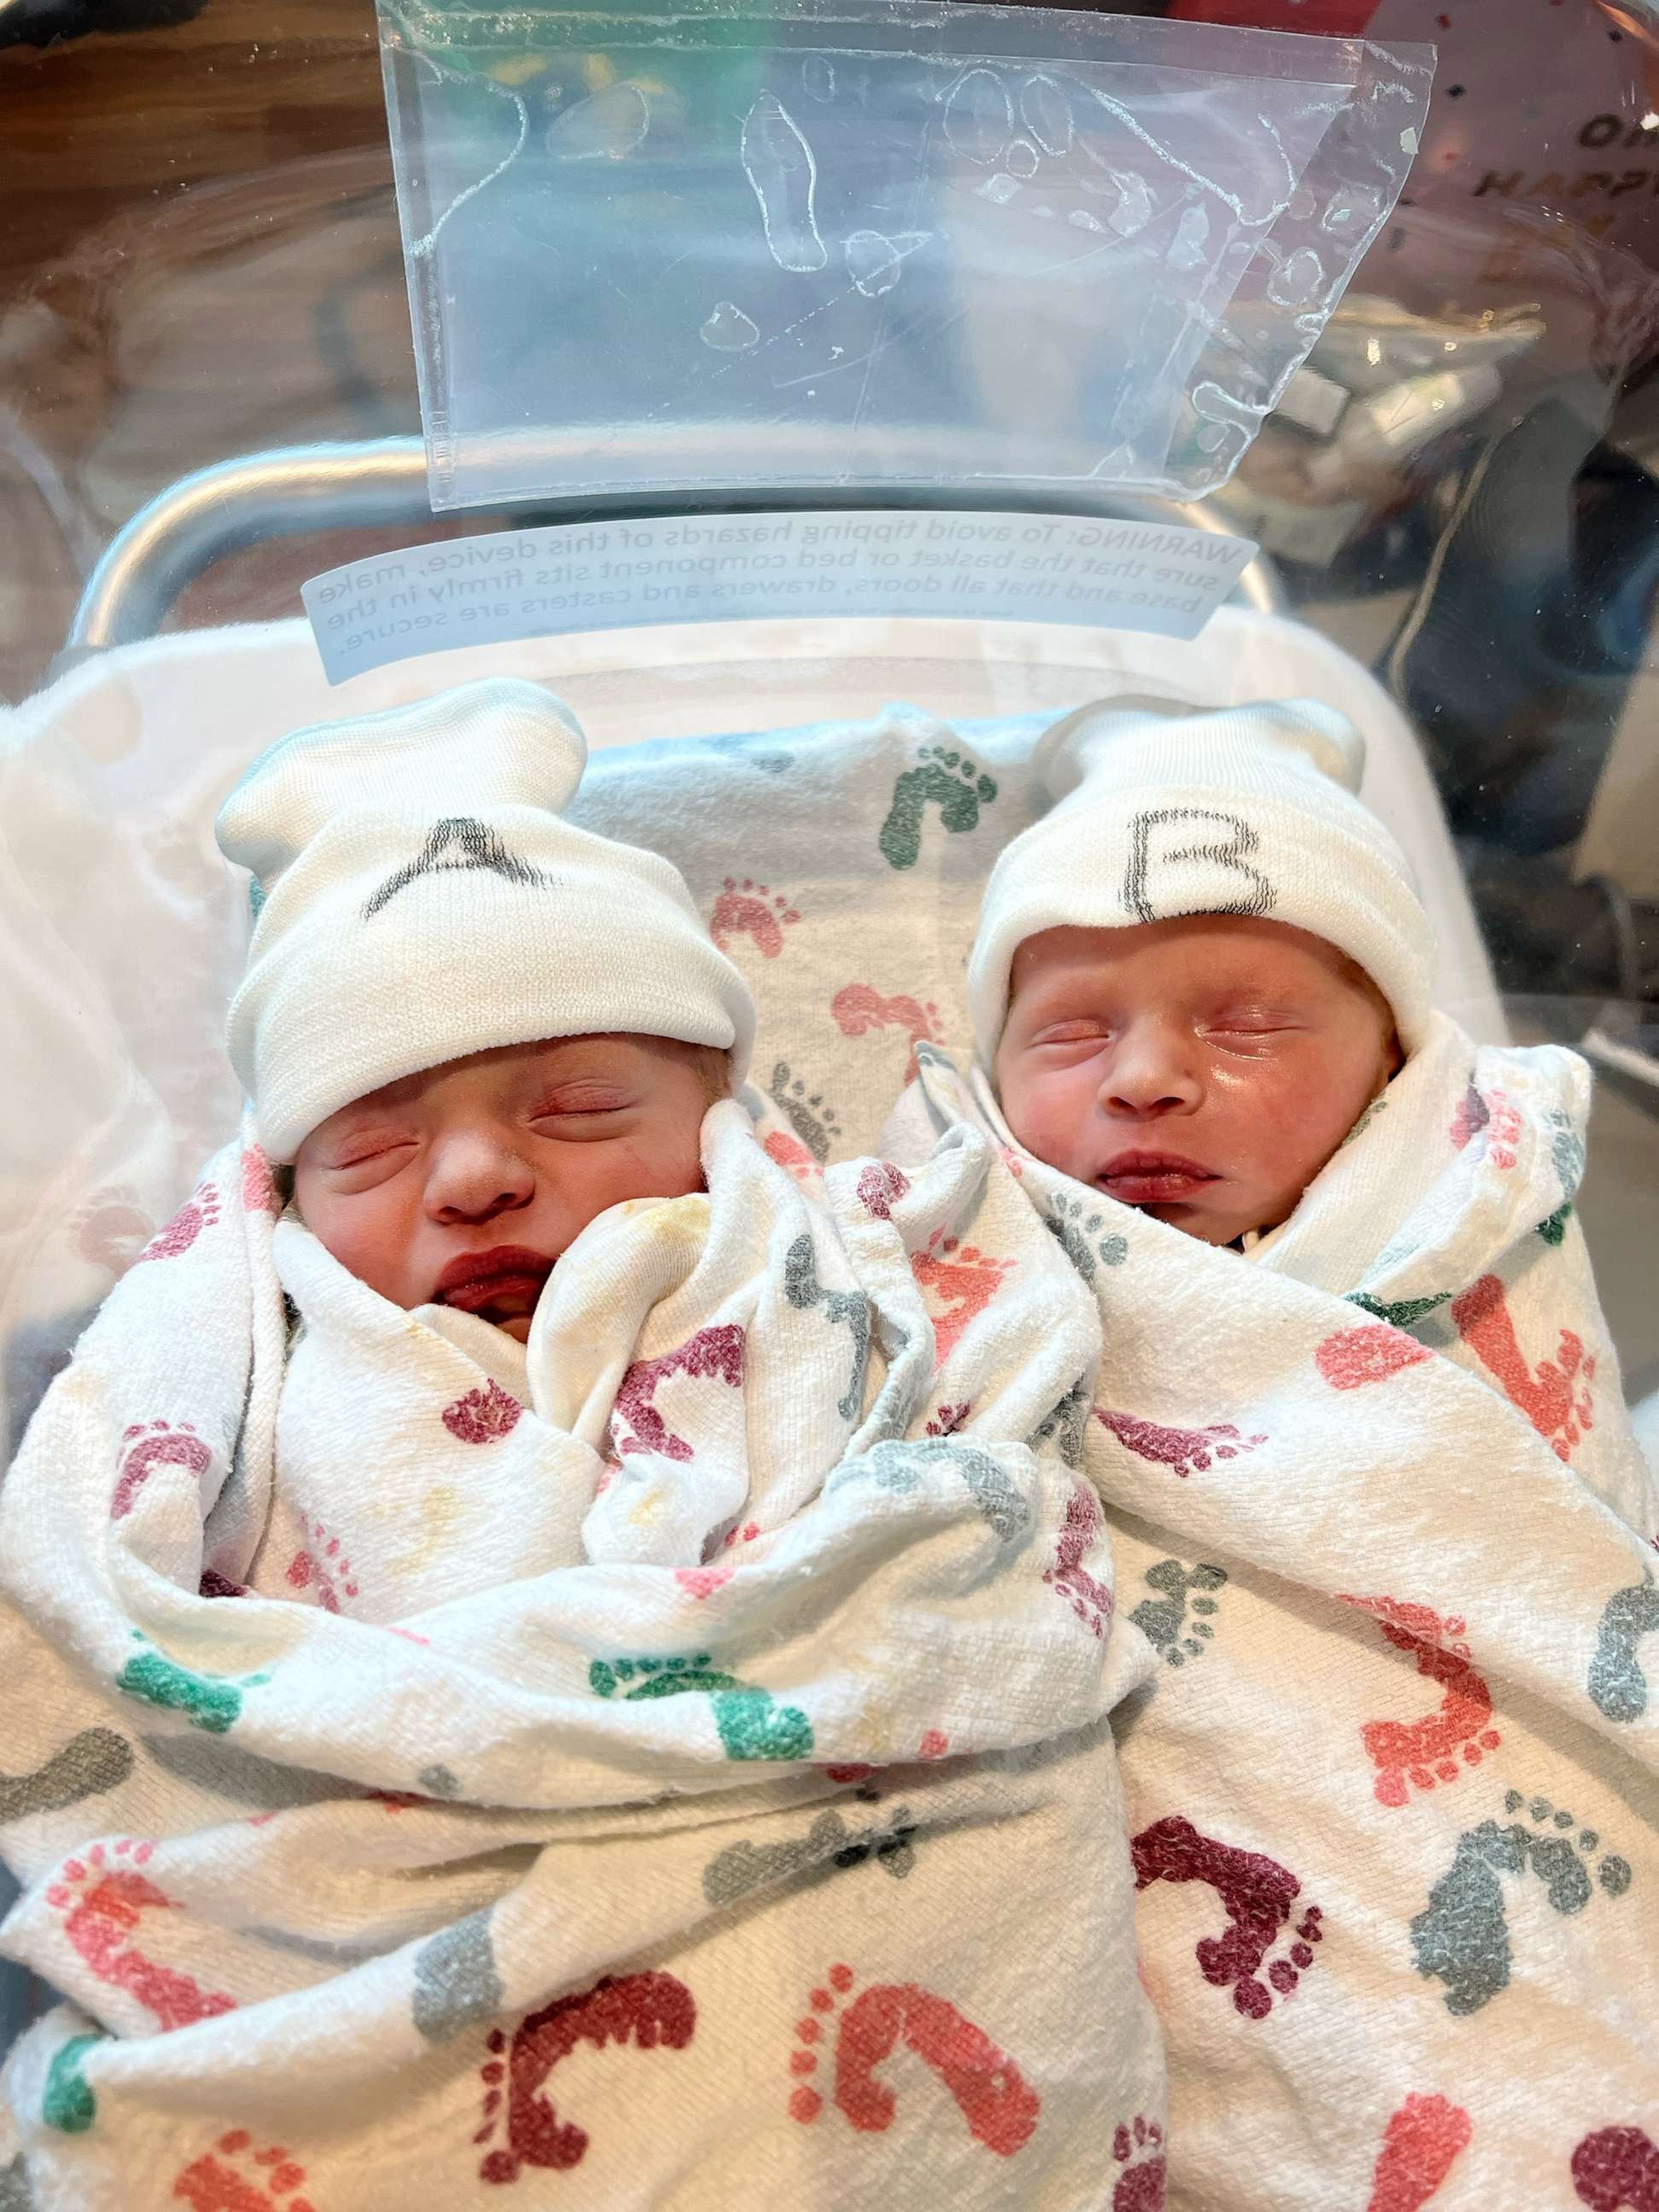 PHOTO: Kali and Cliff Scott's twin daughters were born on two different days, Dec. 31, 2022, and Jan. 1, 2023.